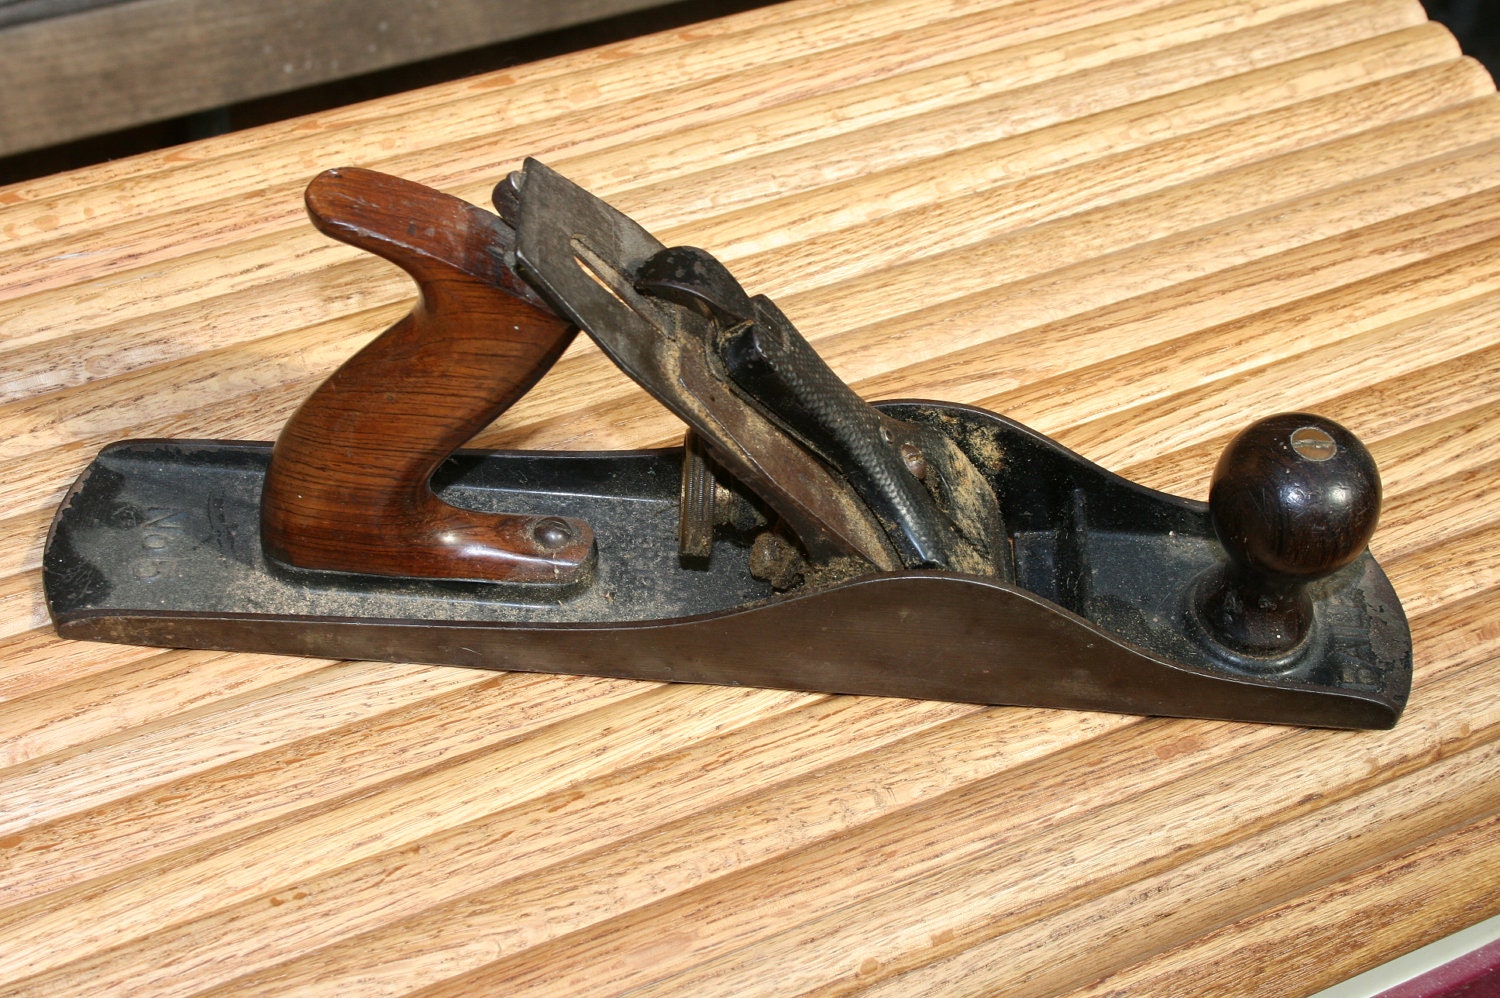 Vintage Stanley Bailey No 5 Wood Plane by csforevervintage on Etsy